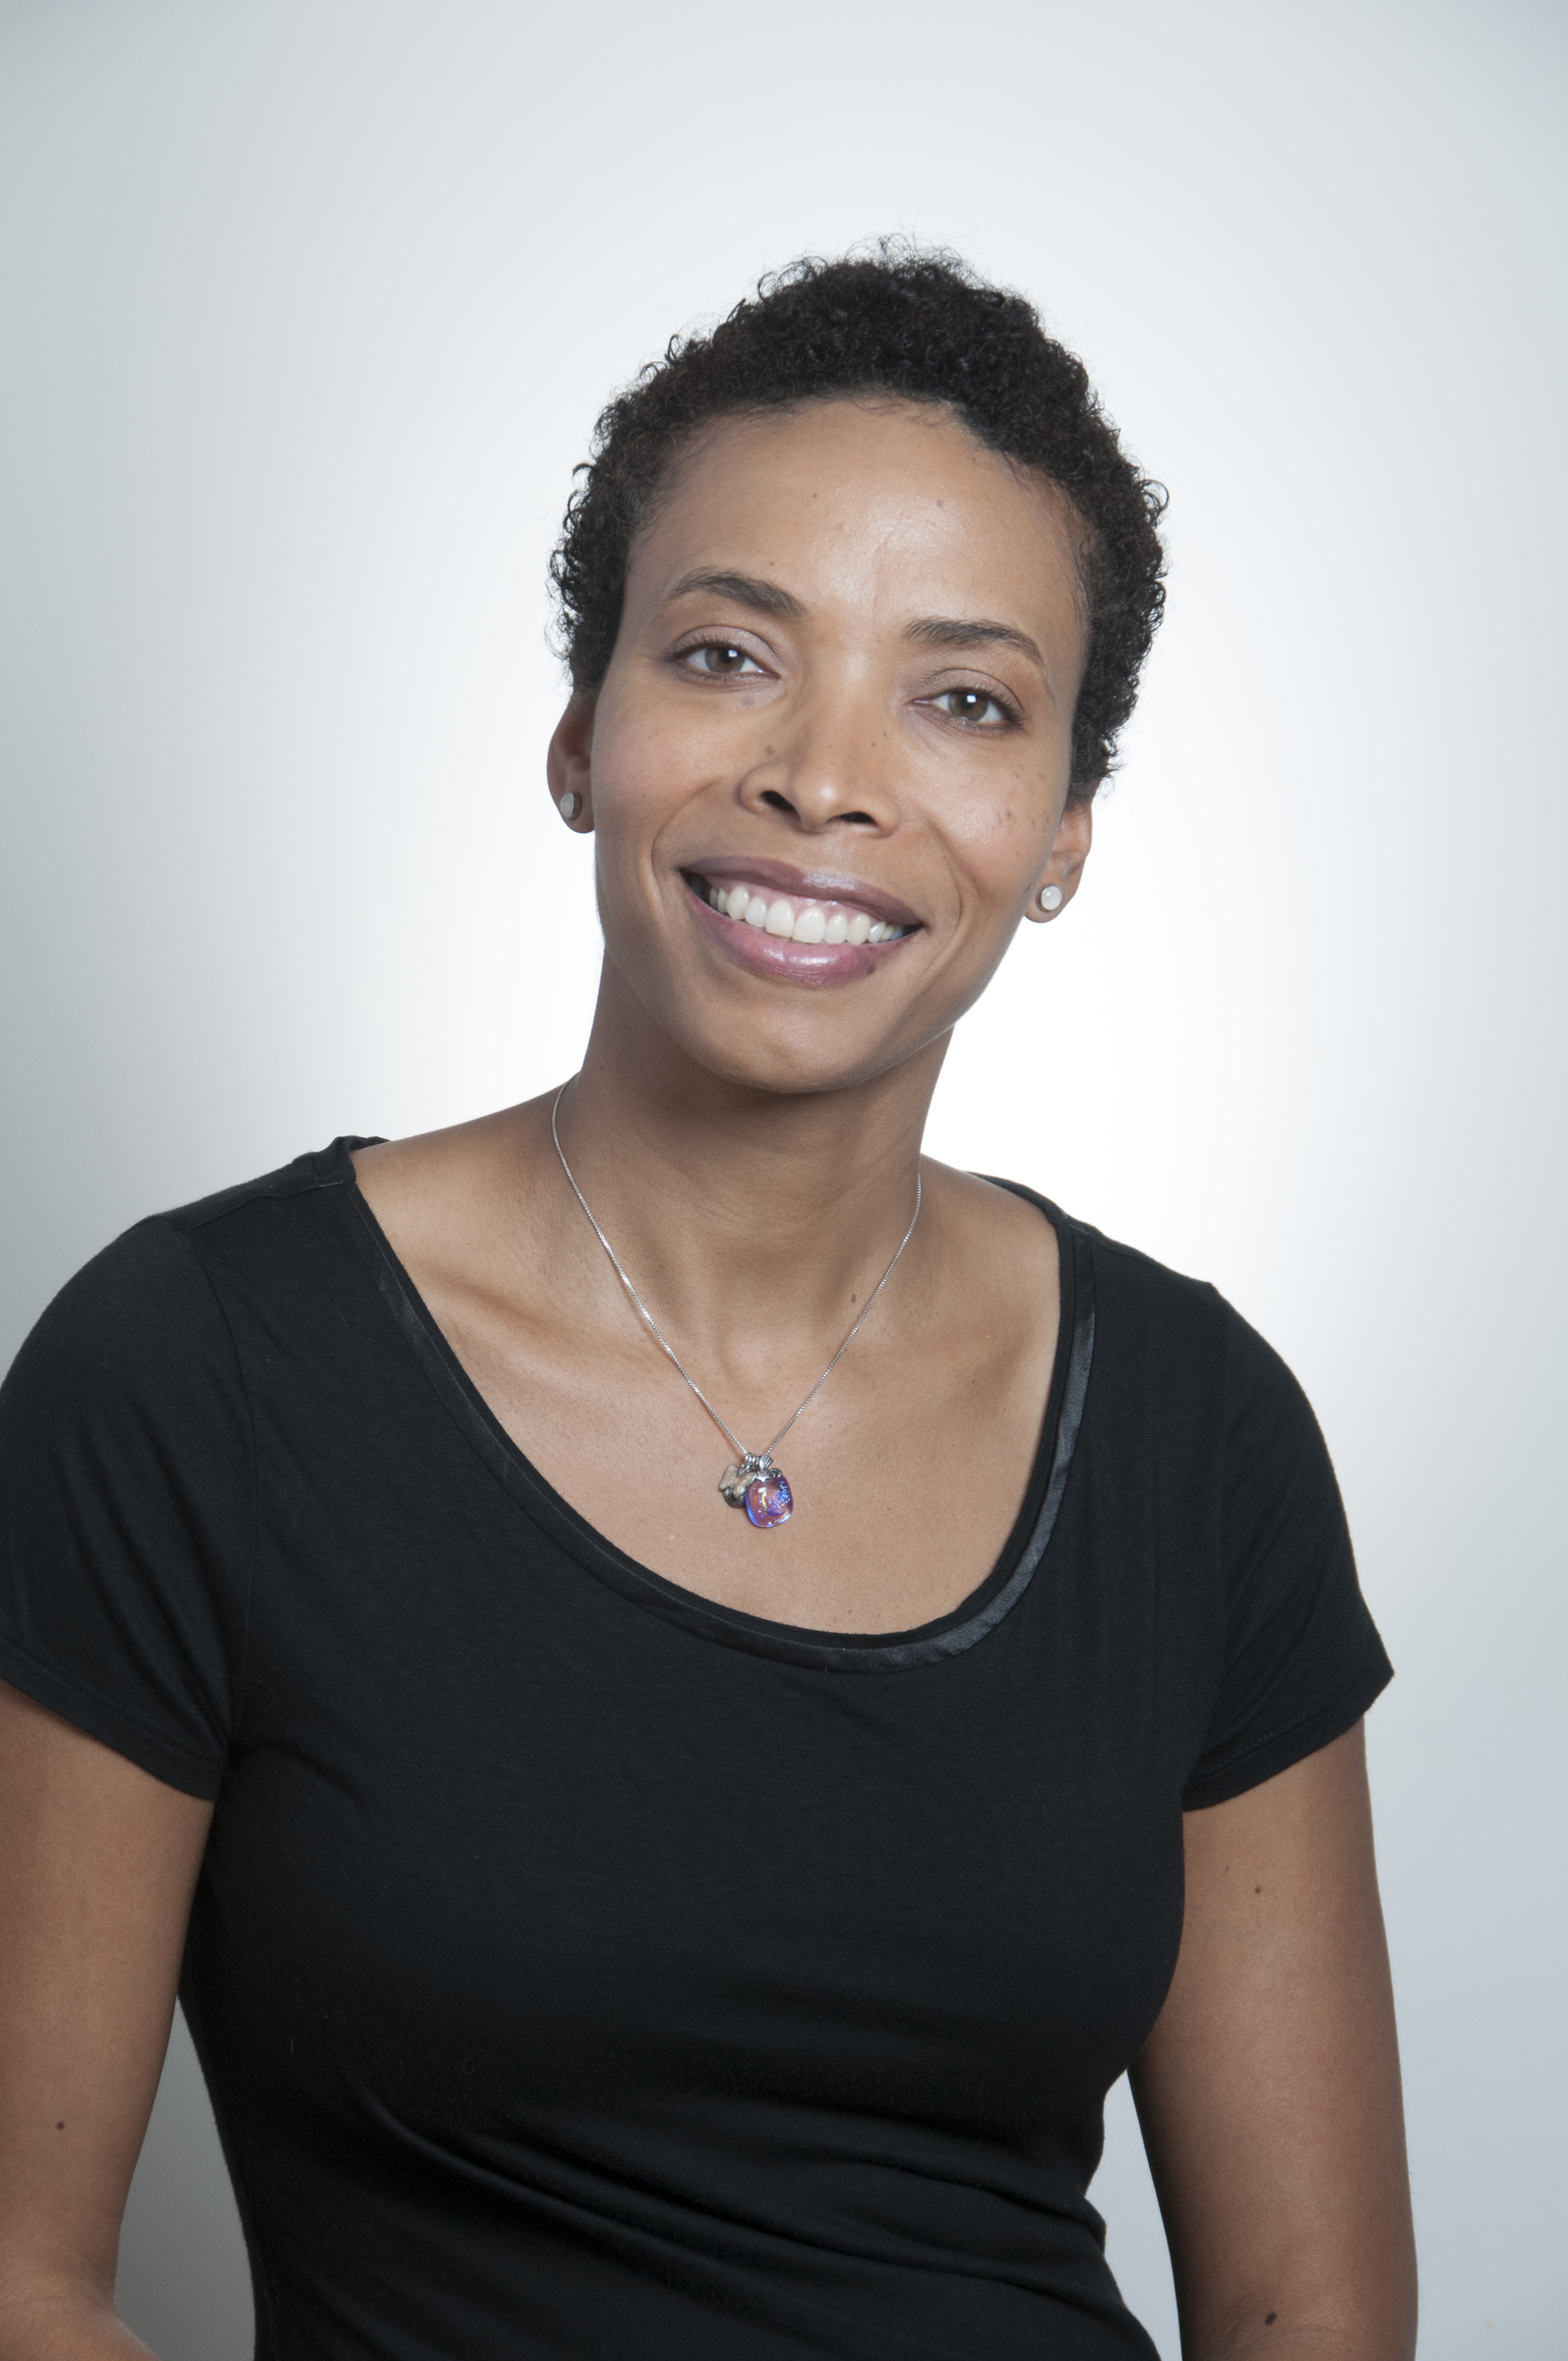 Dr. Aomawa Shields is winner of the 2016 Origins Project Postdoctoral Lectureship Award